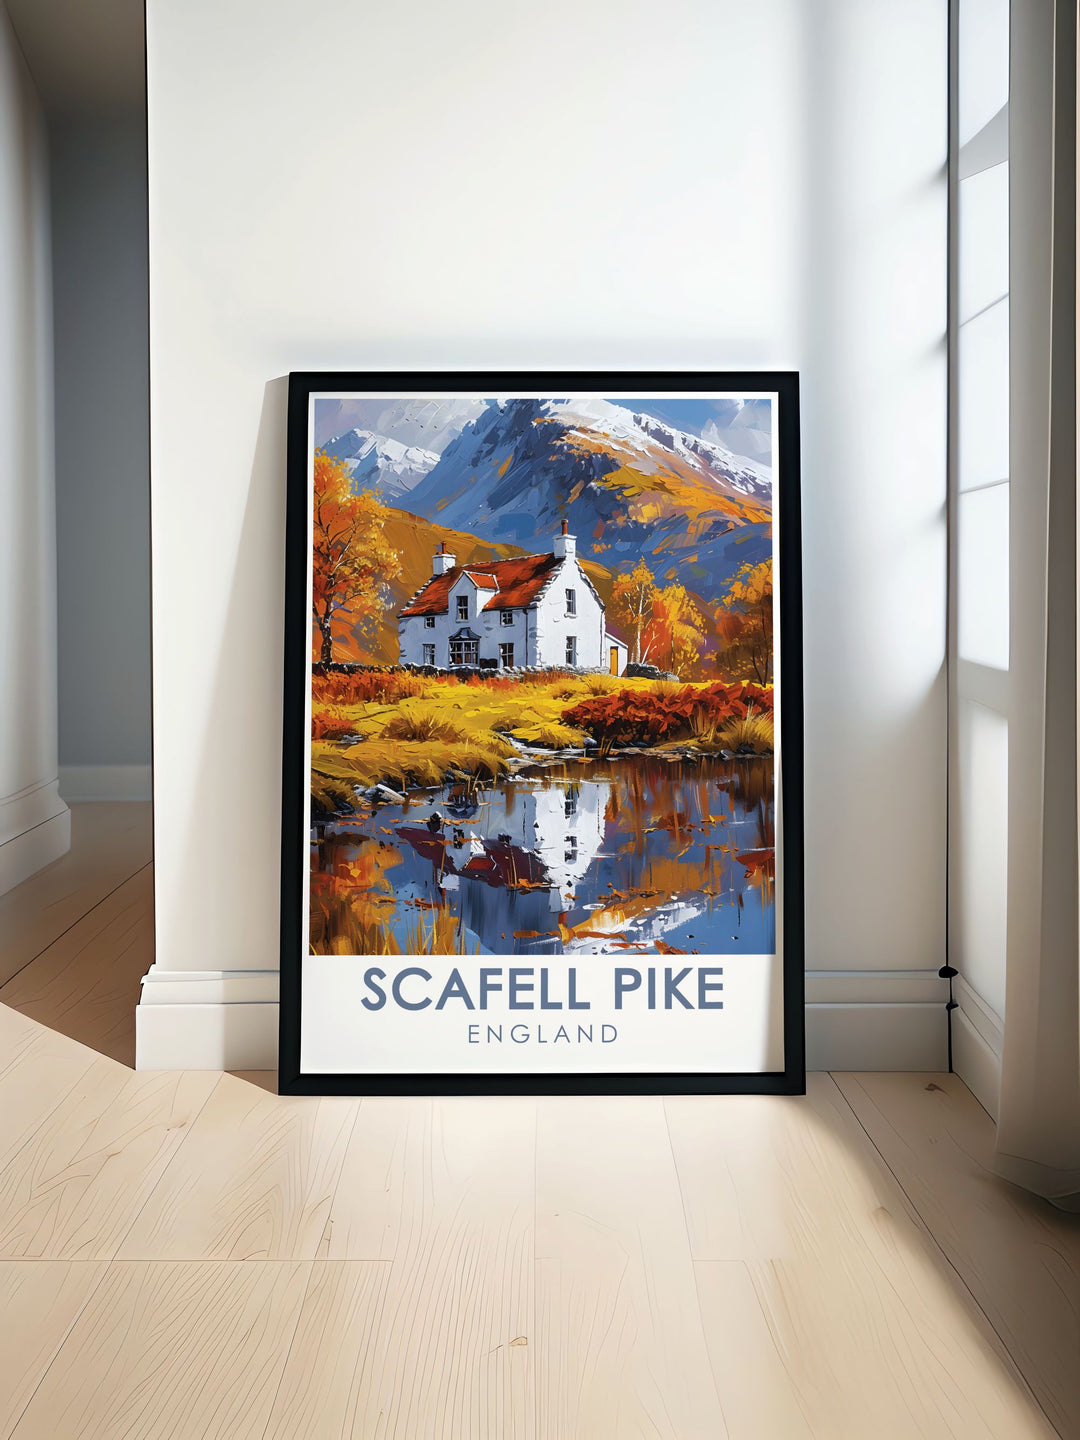 This Wasdale Head print highlights the picturesque stone cottages, ancient churches, and serene lake shores that make this area so charming. A perfect addition to your collection of travel posters.